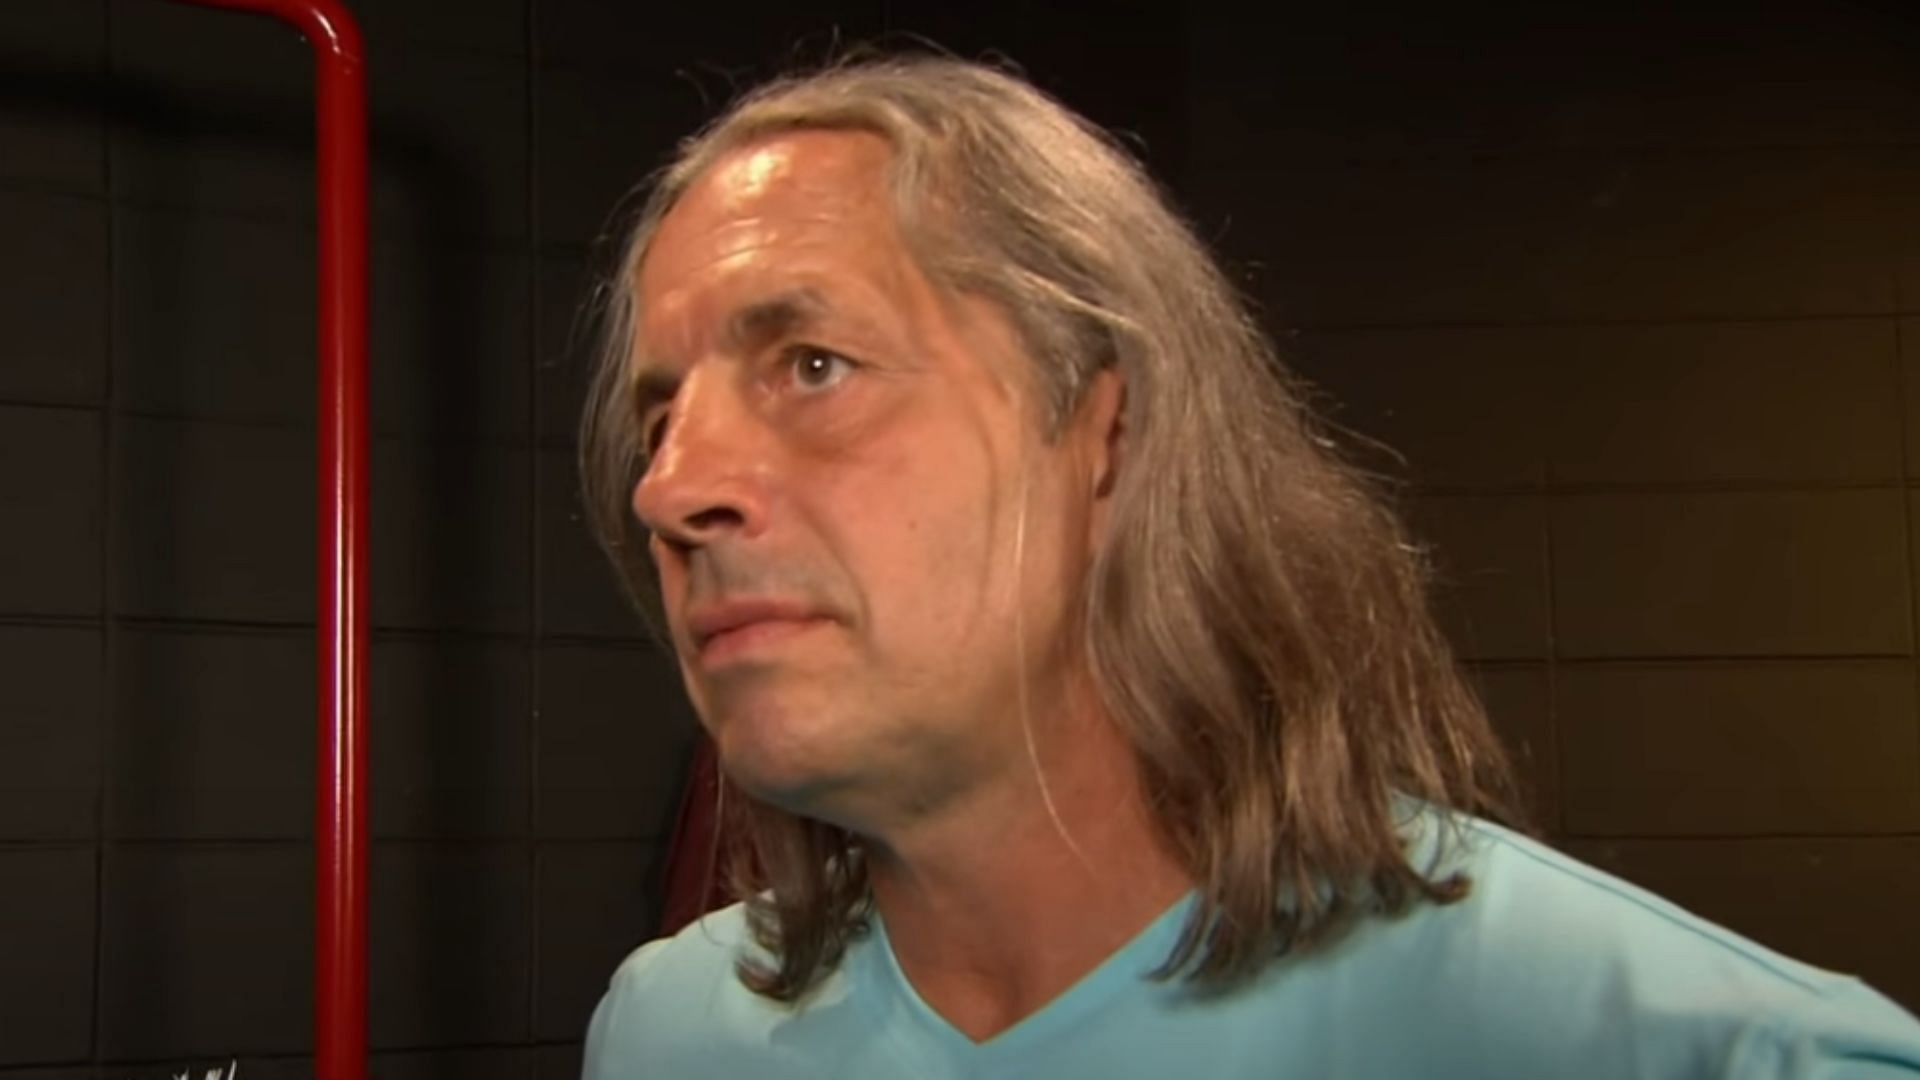 Bret Hart is a five-time WWE Champion.